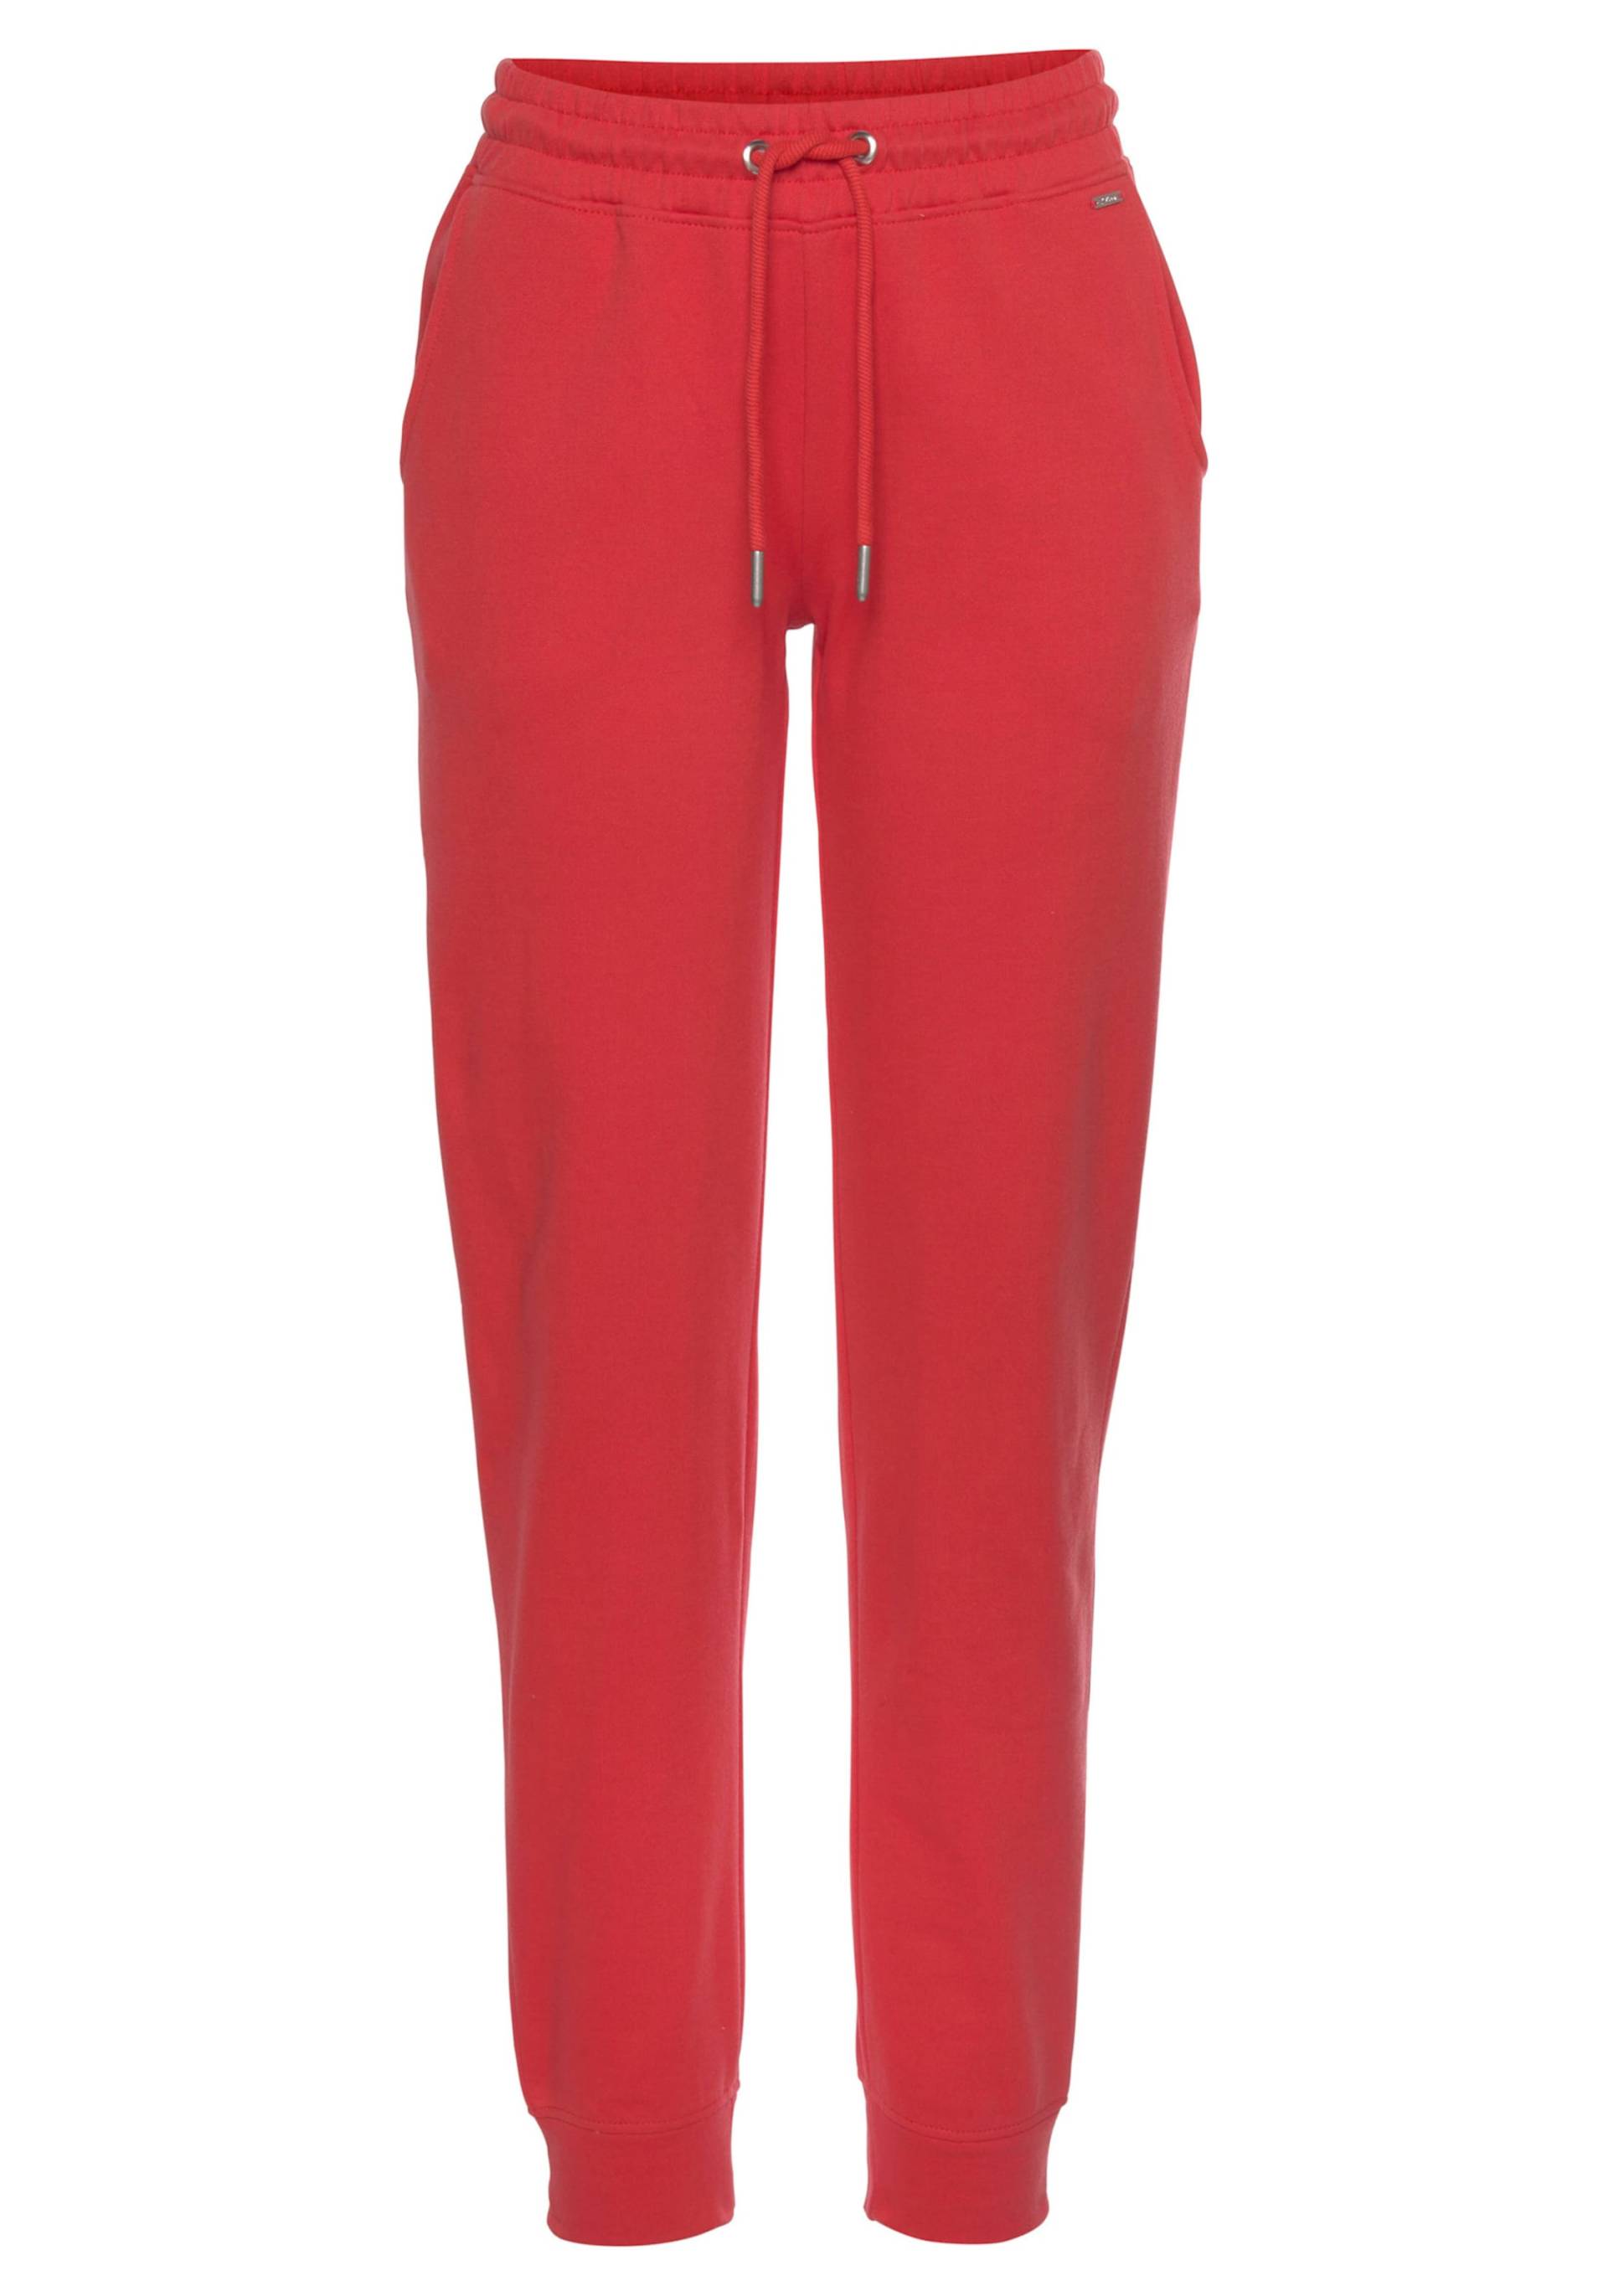 Relaxhose in rot von H.I.S